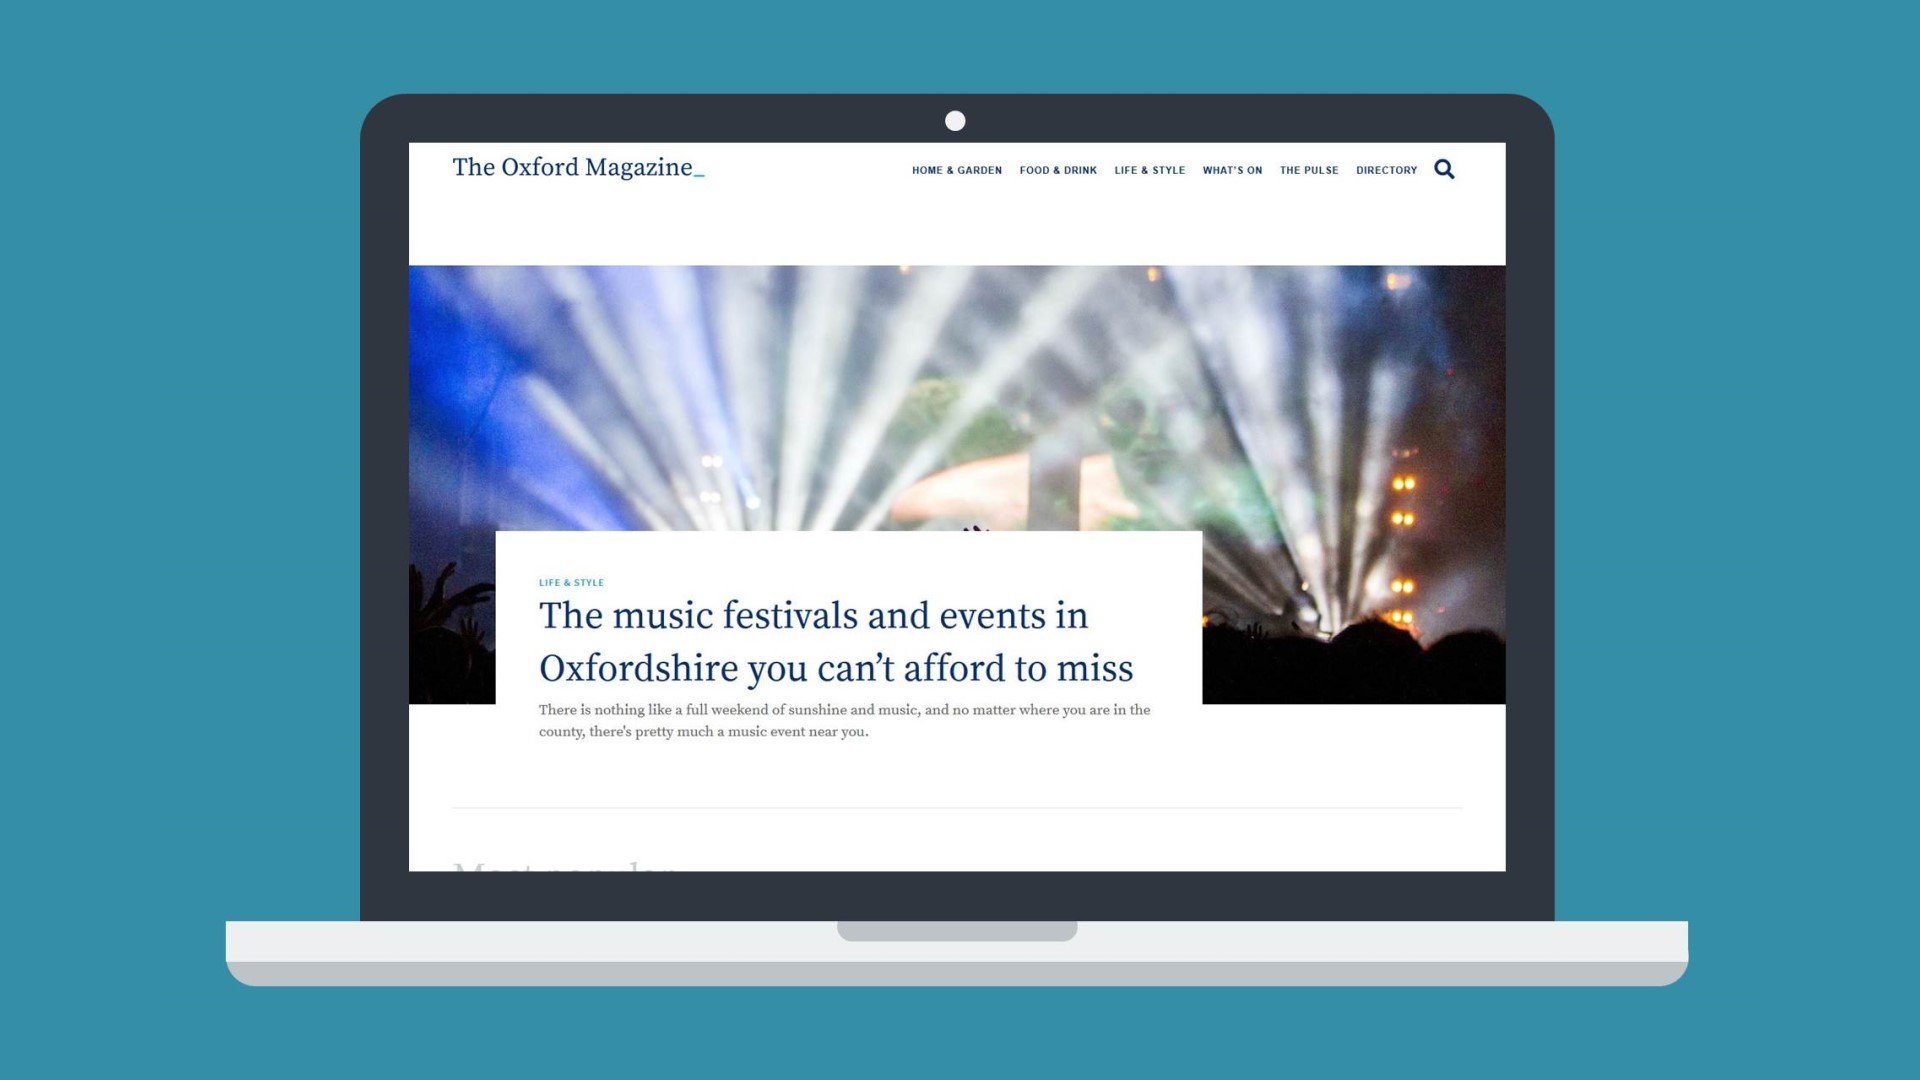 The Oxford Magazine: From zero to 1 million annual page views in 24 months